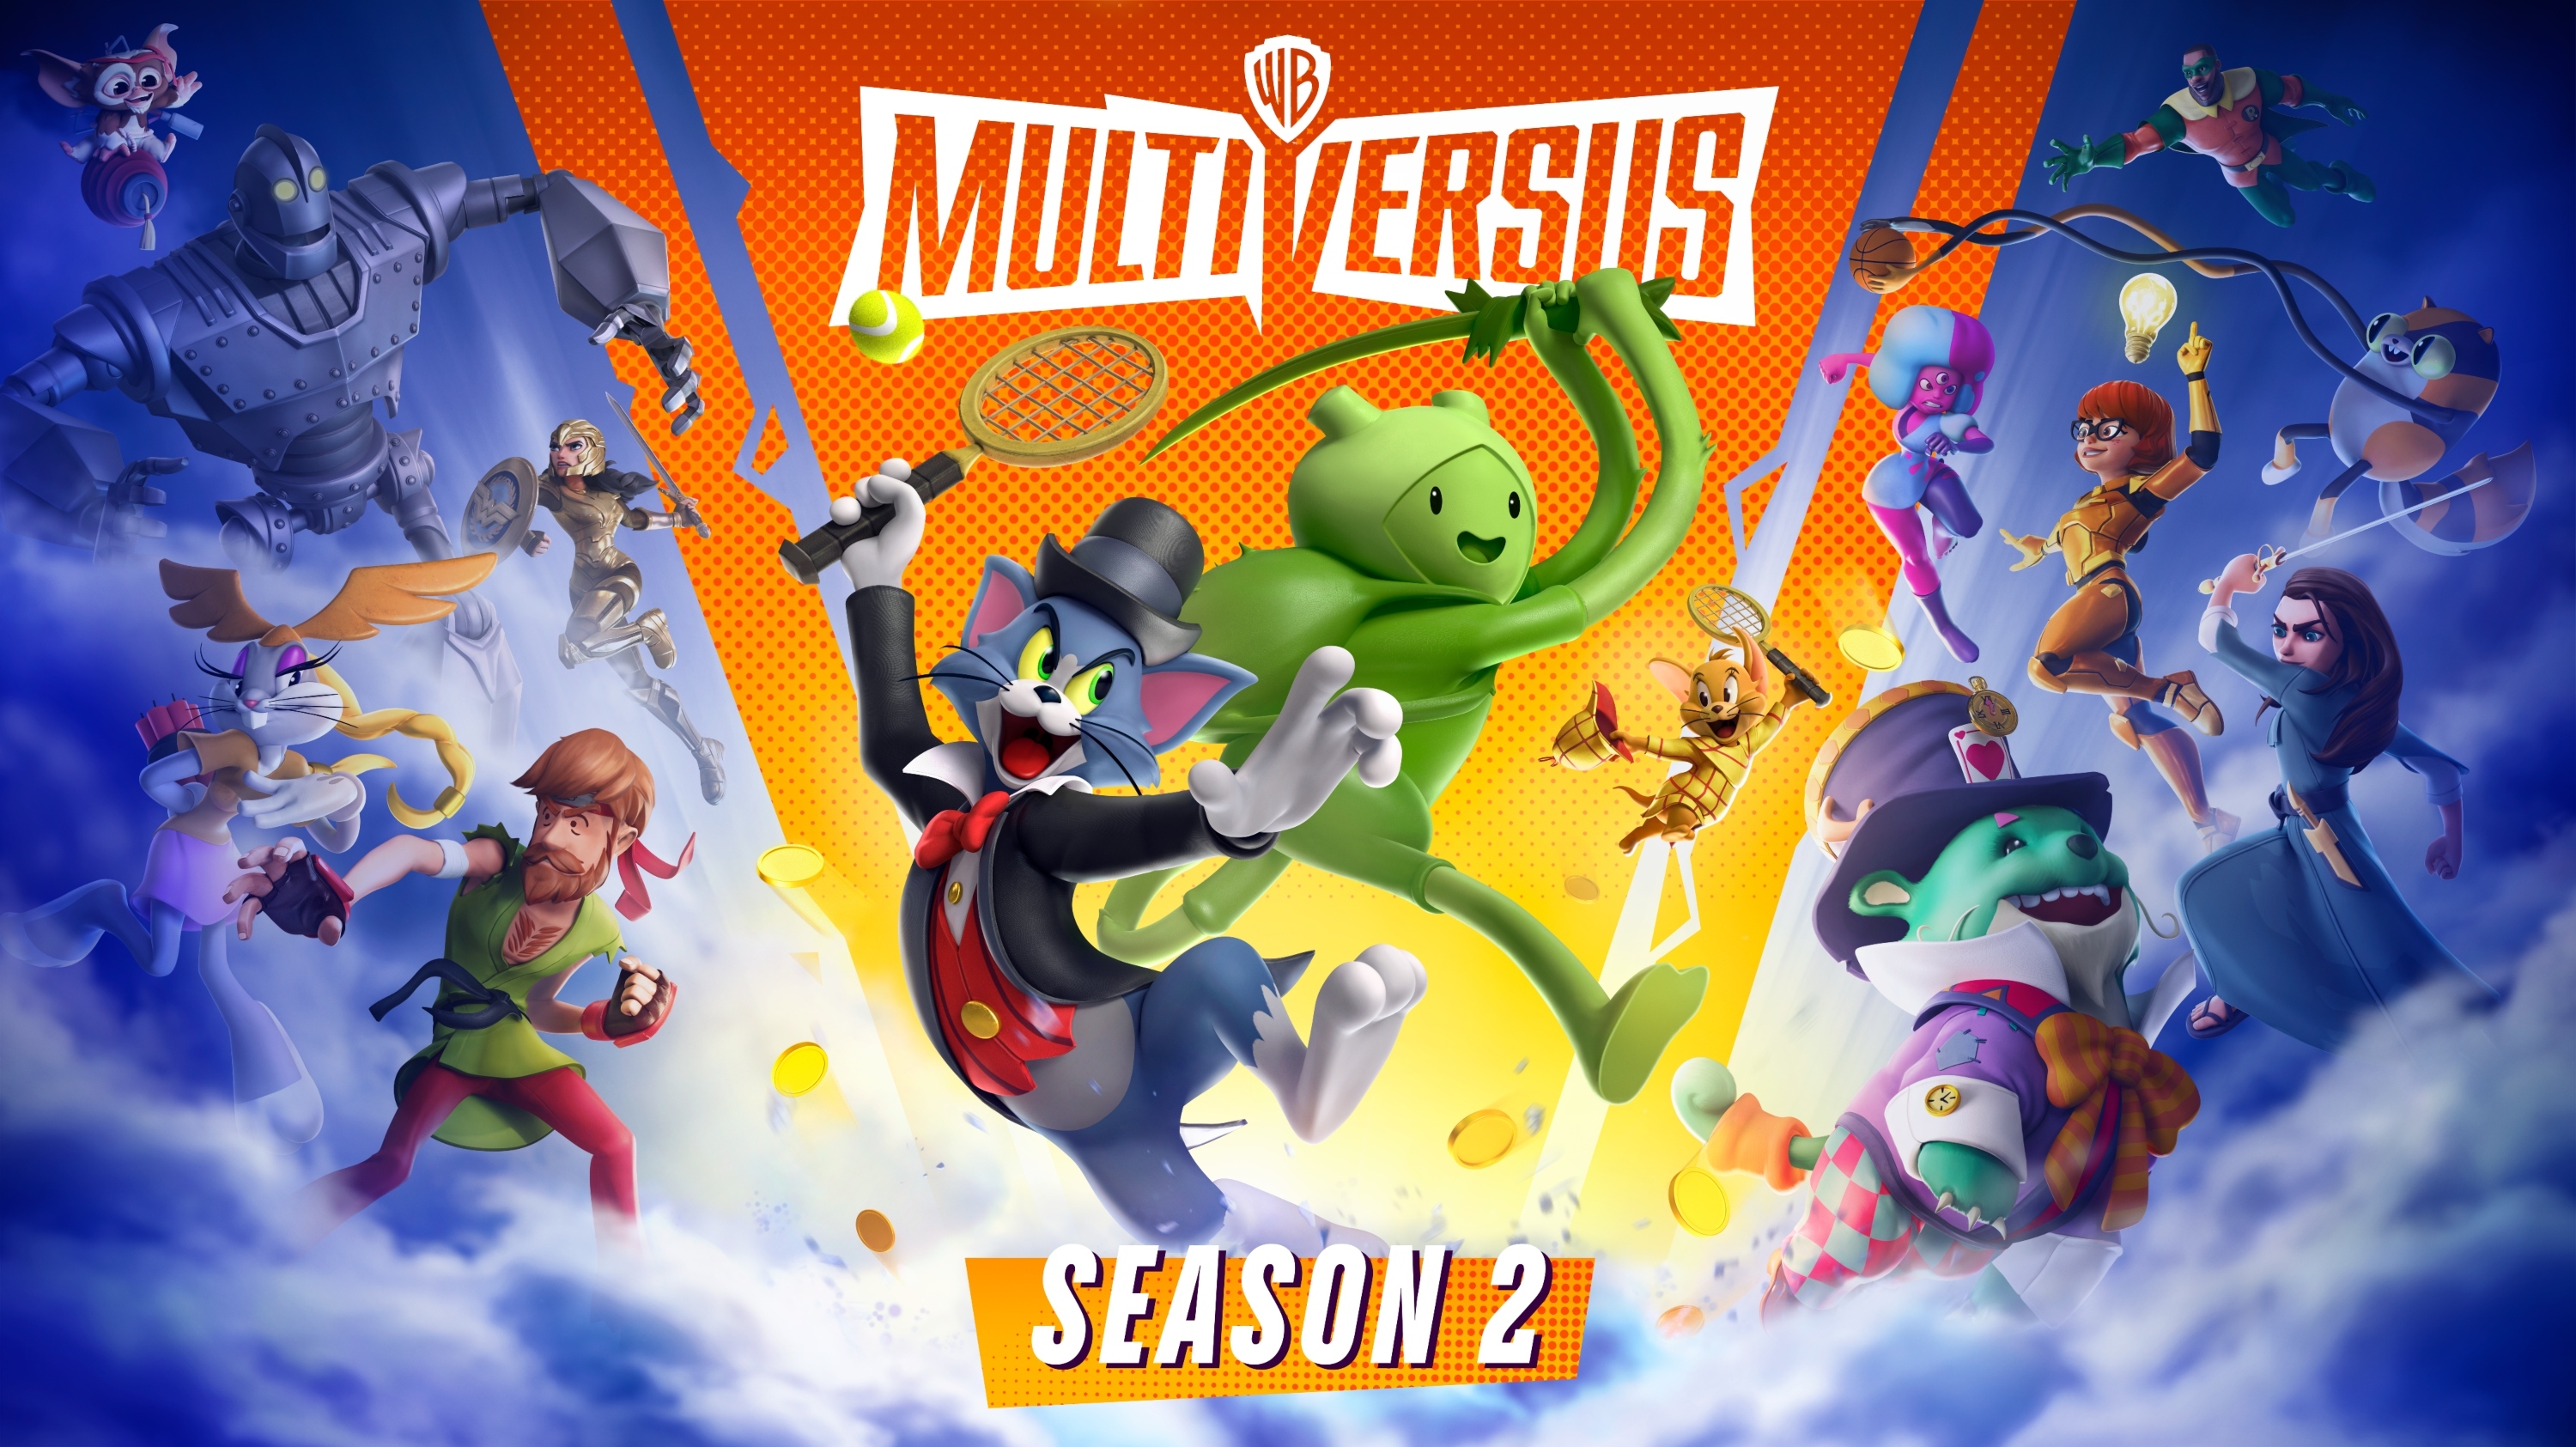 Warner Bros and Player First Games will close the MultiVersus open beta and